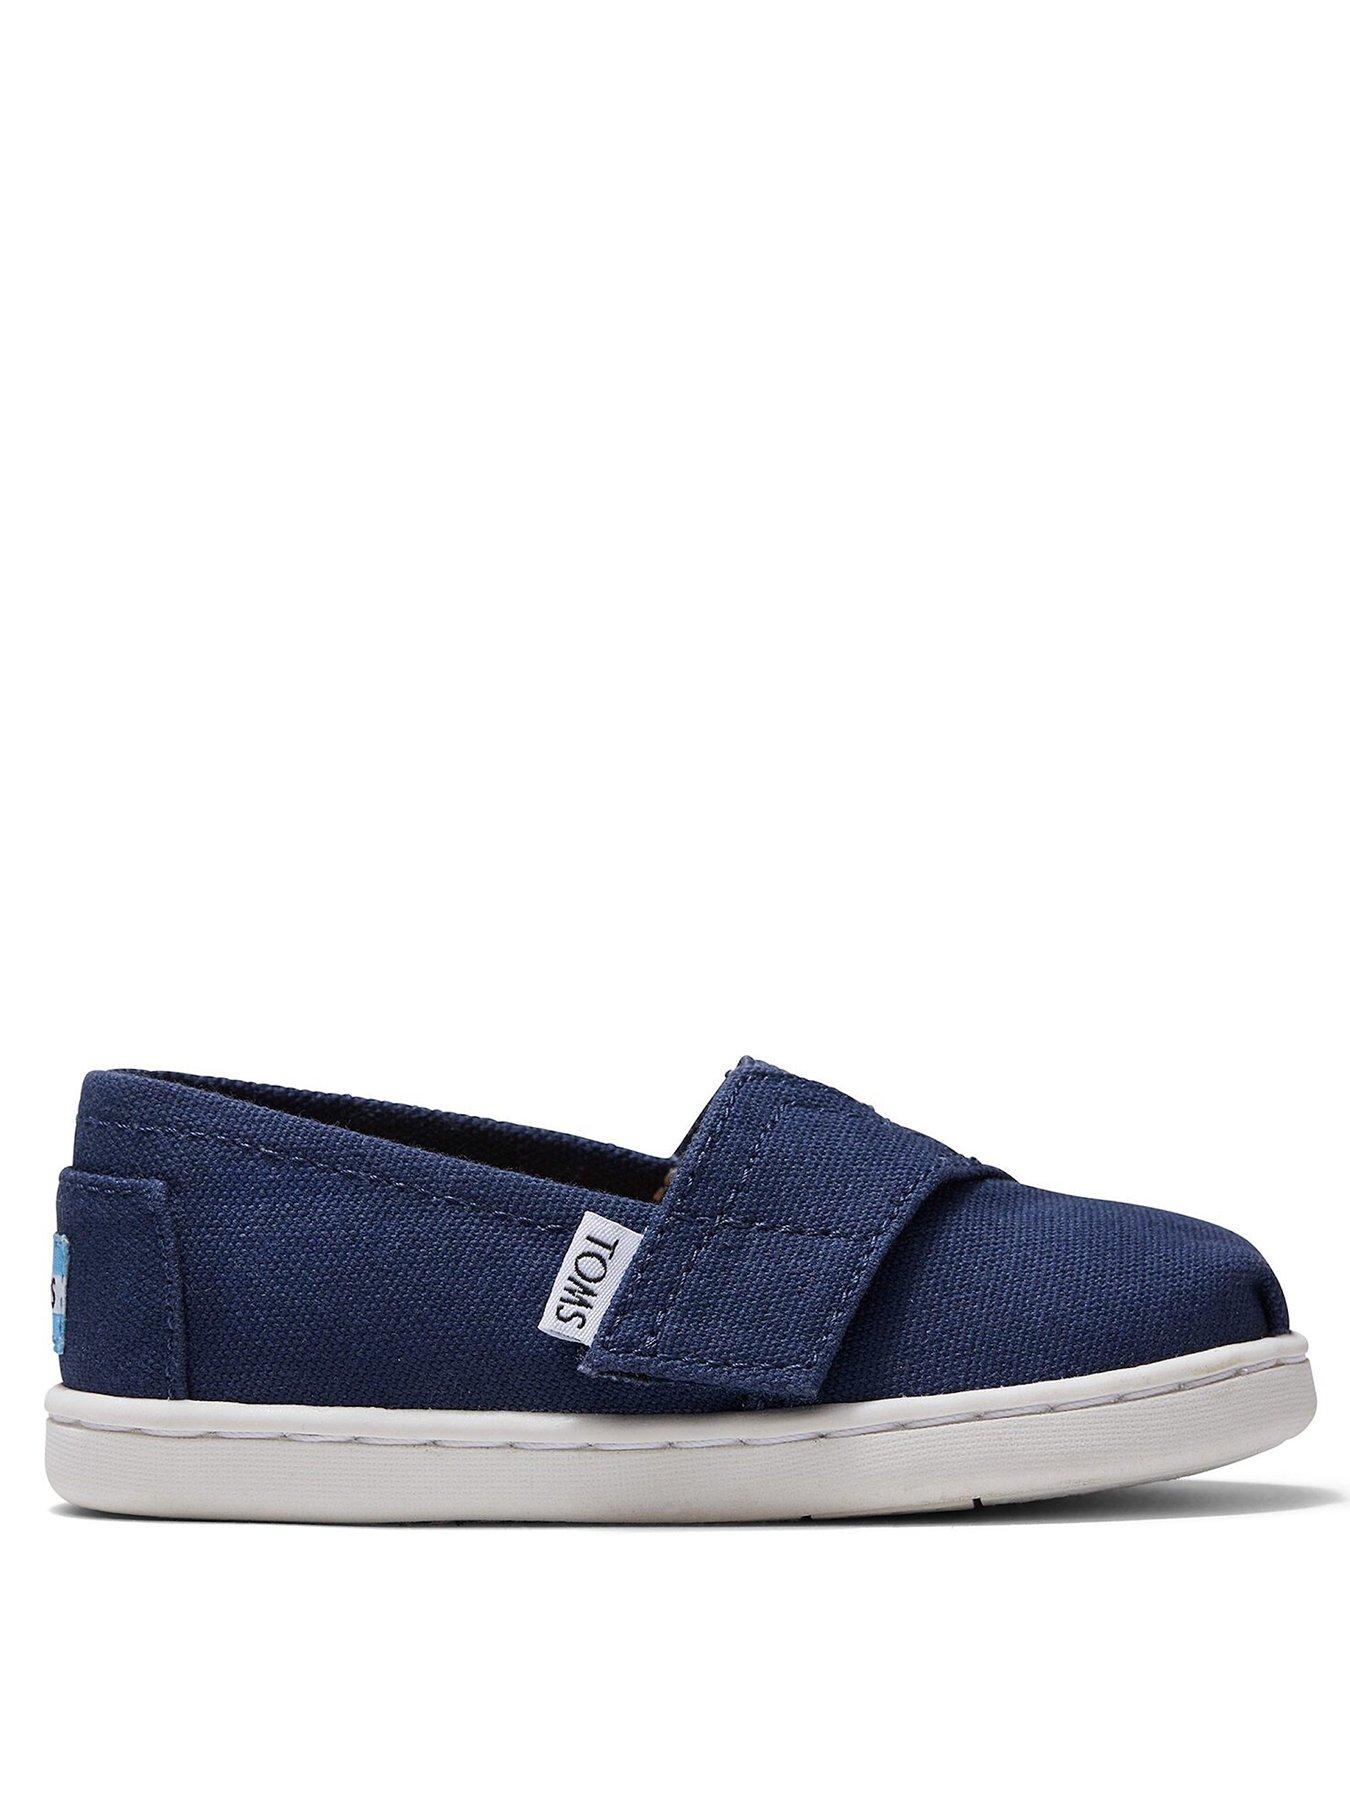 baby blue toms